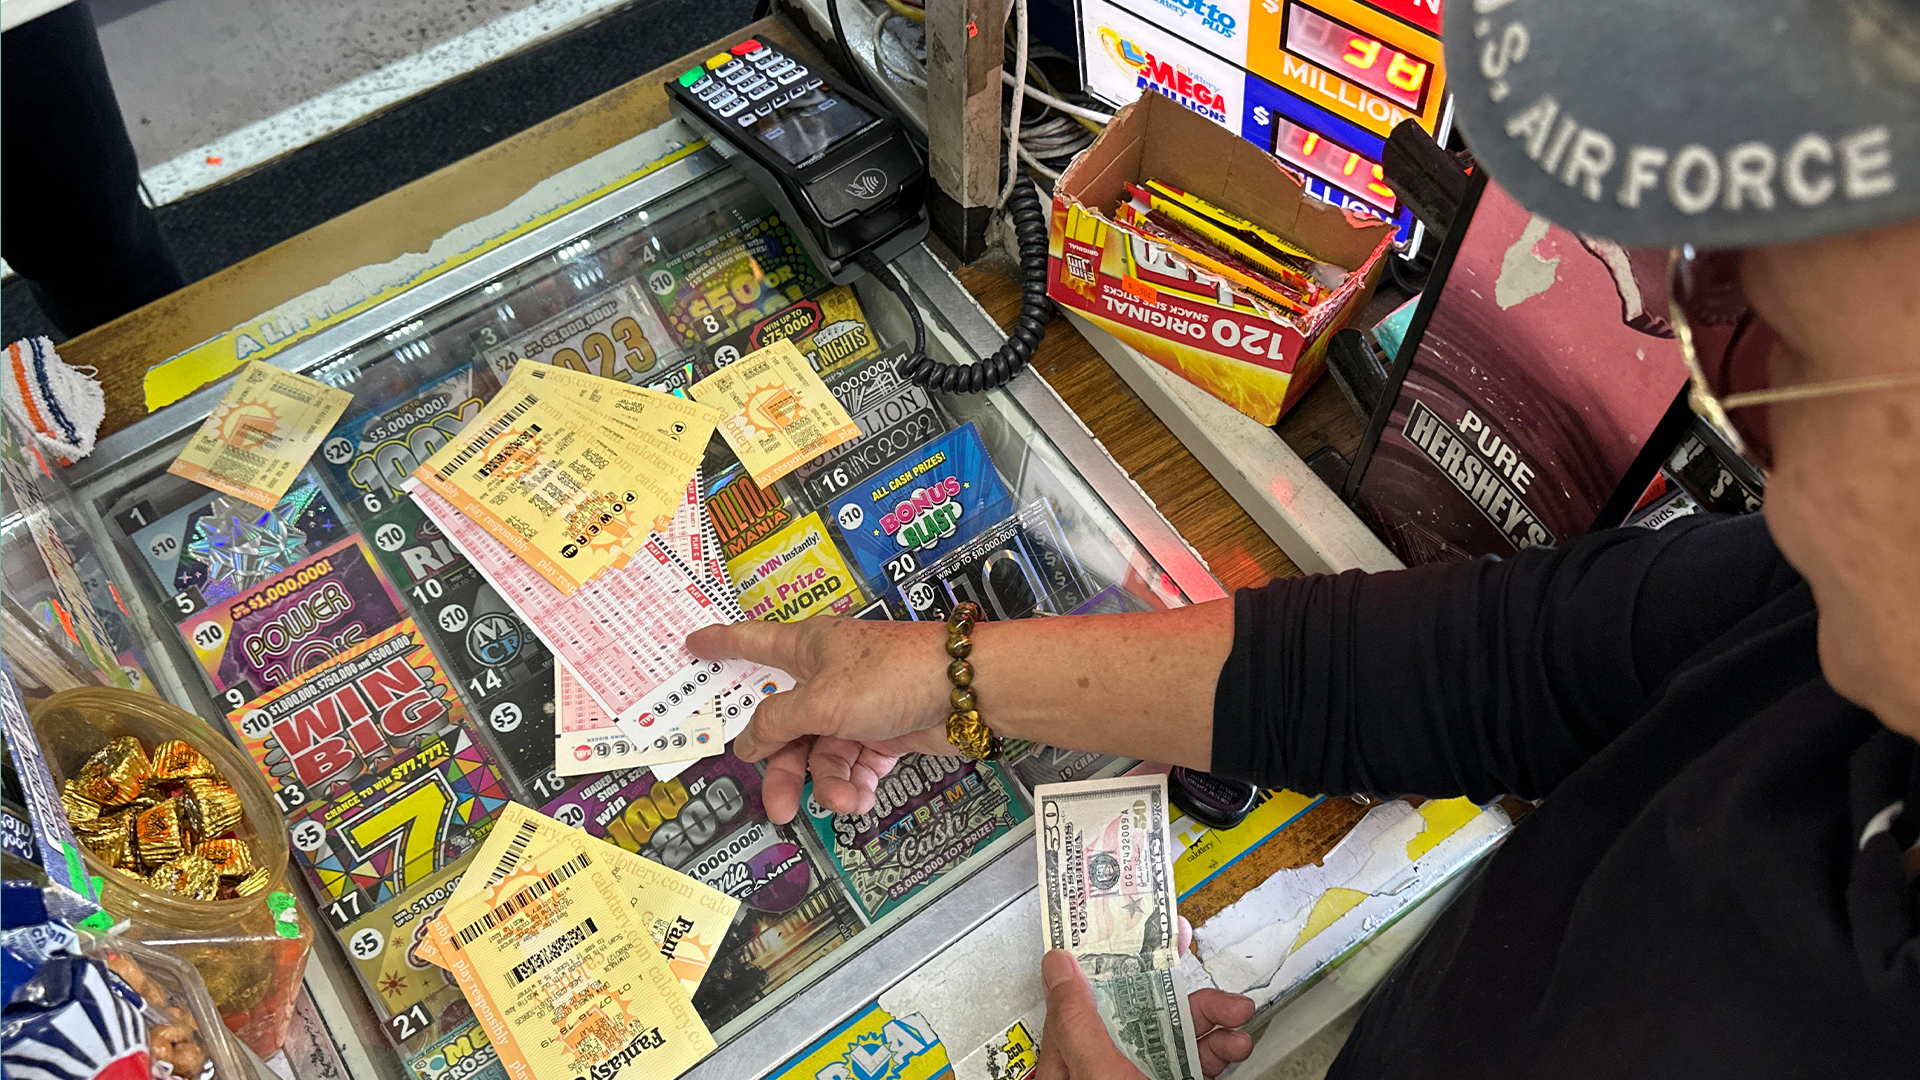 I bought Powerball tickets on my lunch break and returned to work a millionaire – but I immediately lost thousands [Video]